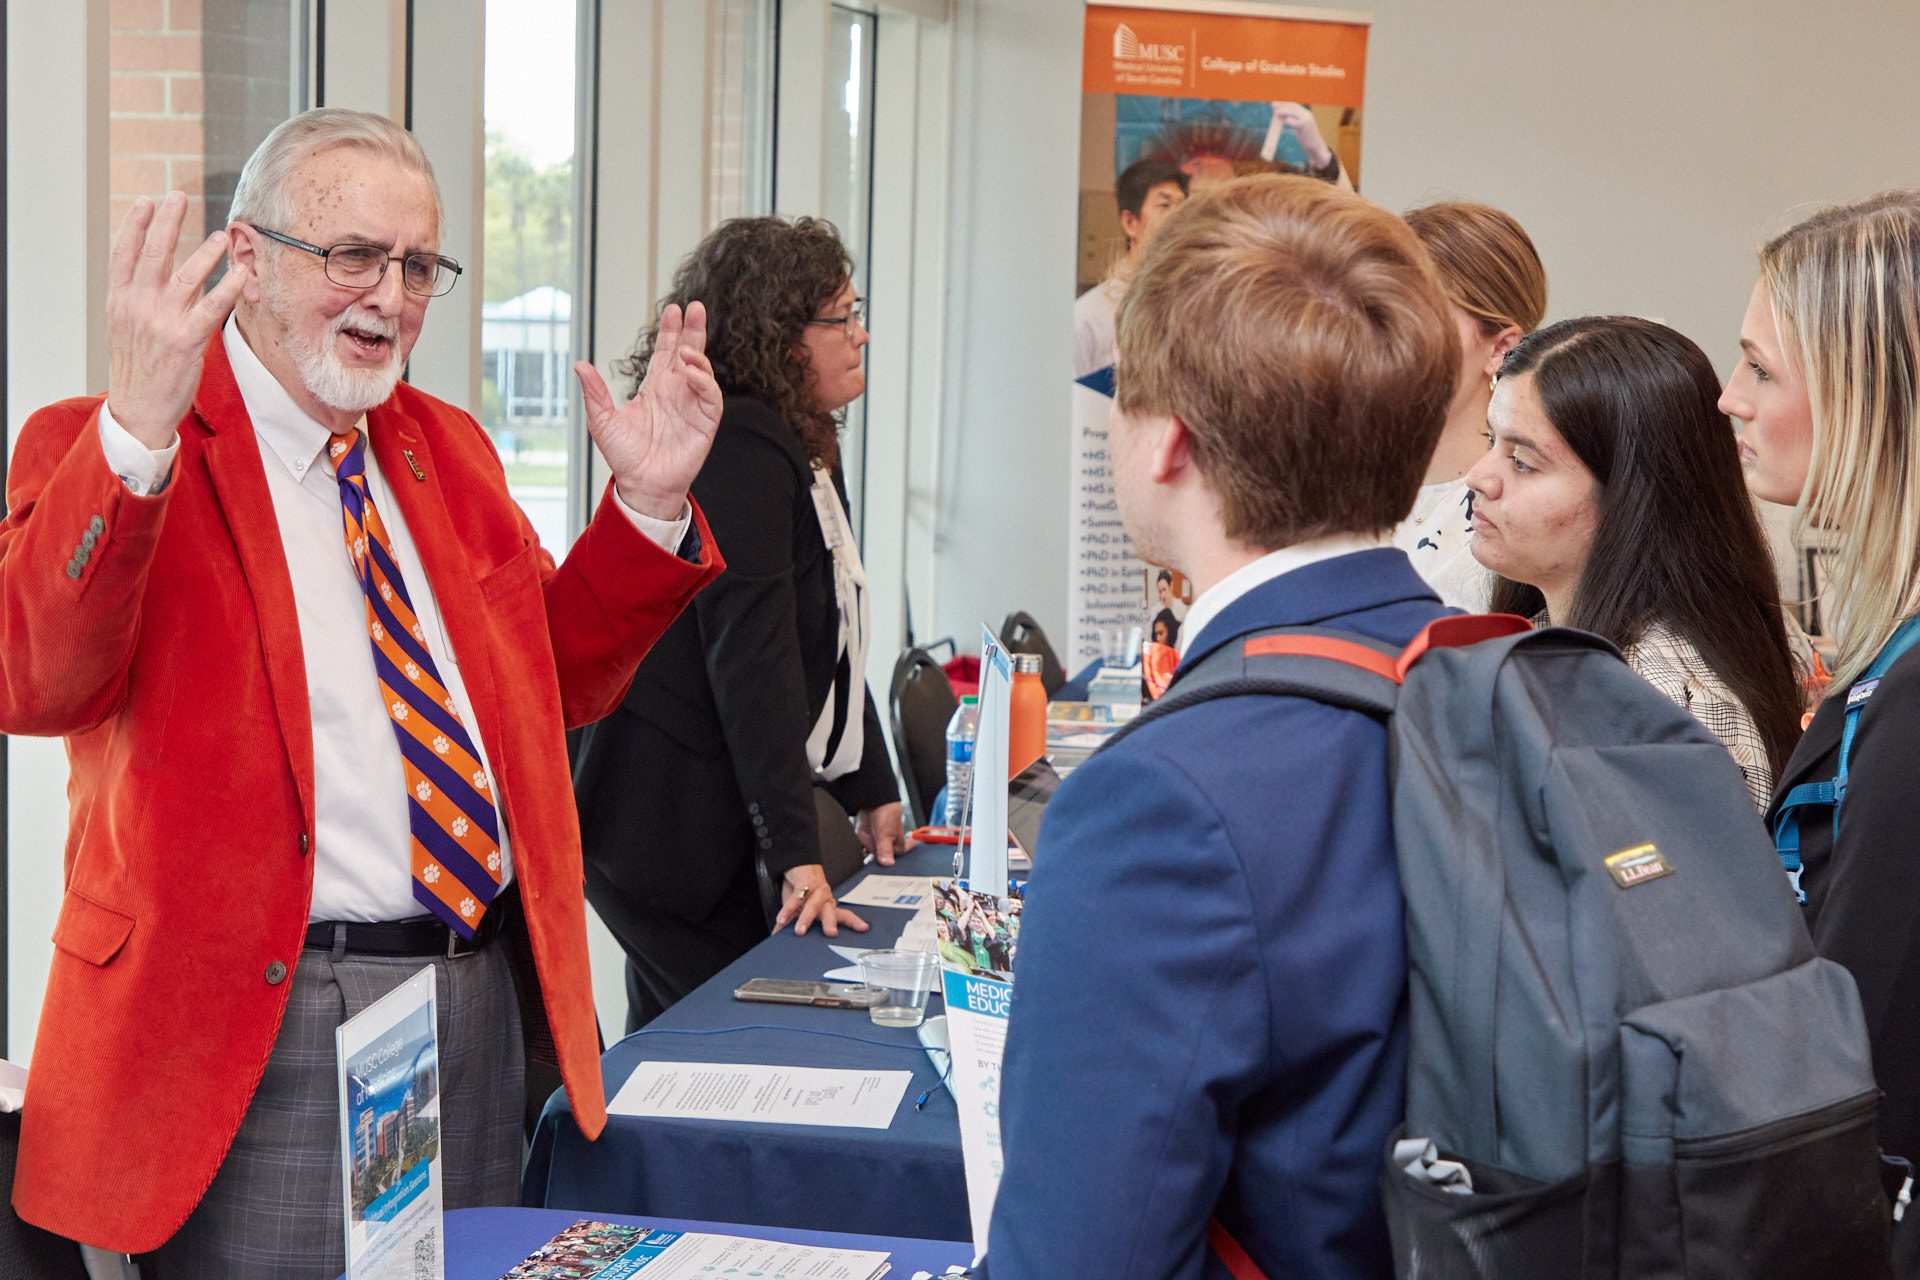 A man wearing an orange sports coat gestures to a student wearing a backpack that he's talking to at a career fair.